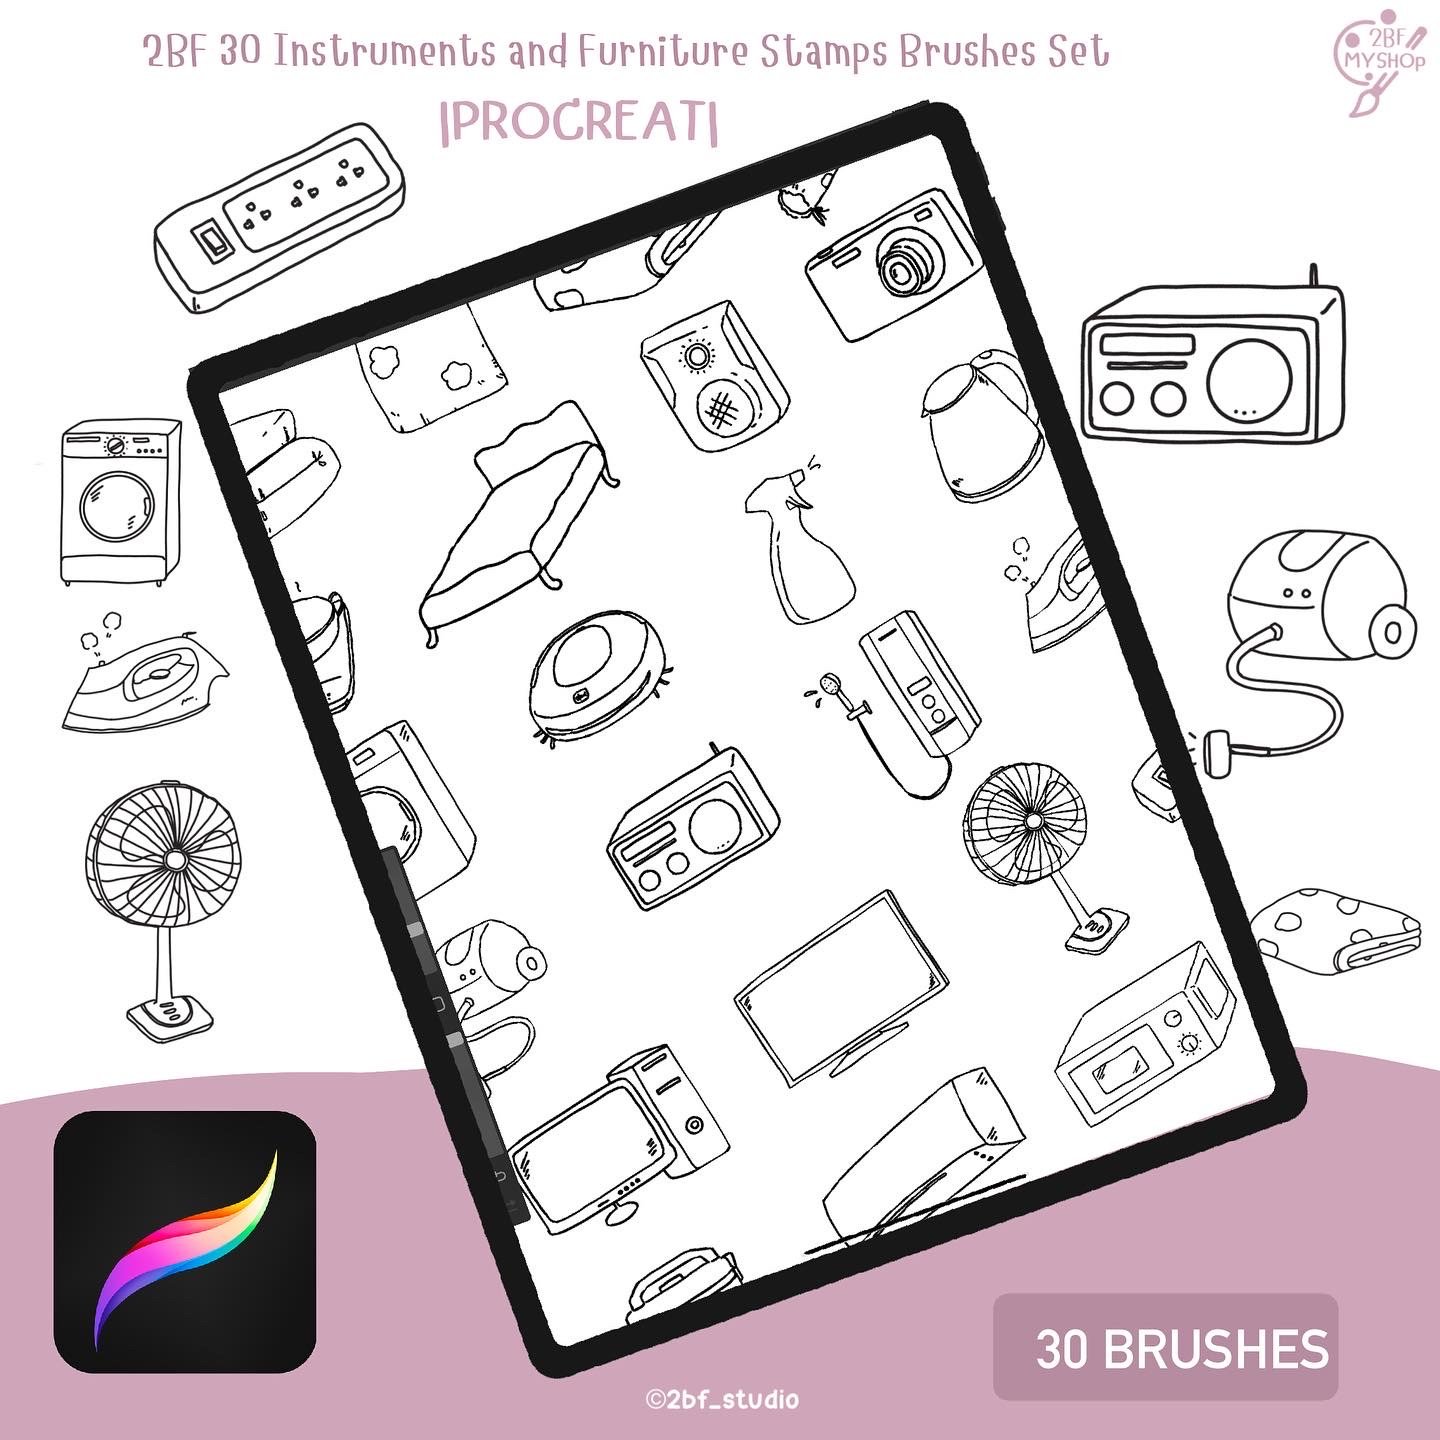 2BF 2BF 30 Instruments and Furniture Stamps Brushes Set   |PROCREAT BRUSHED|